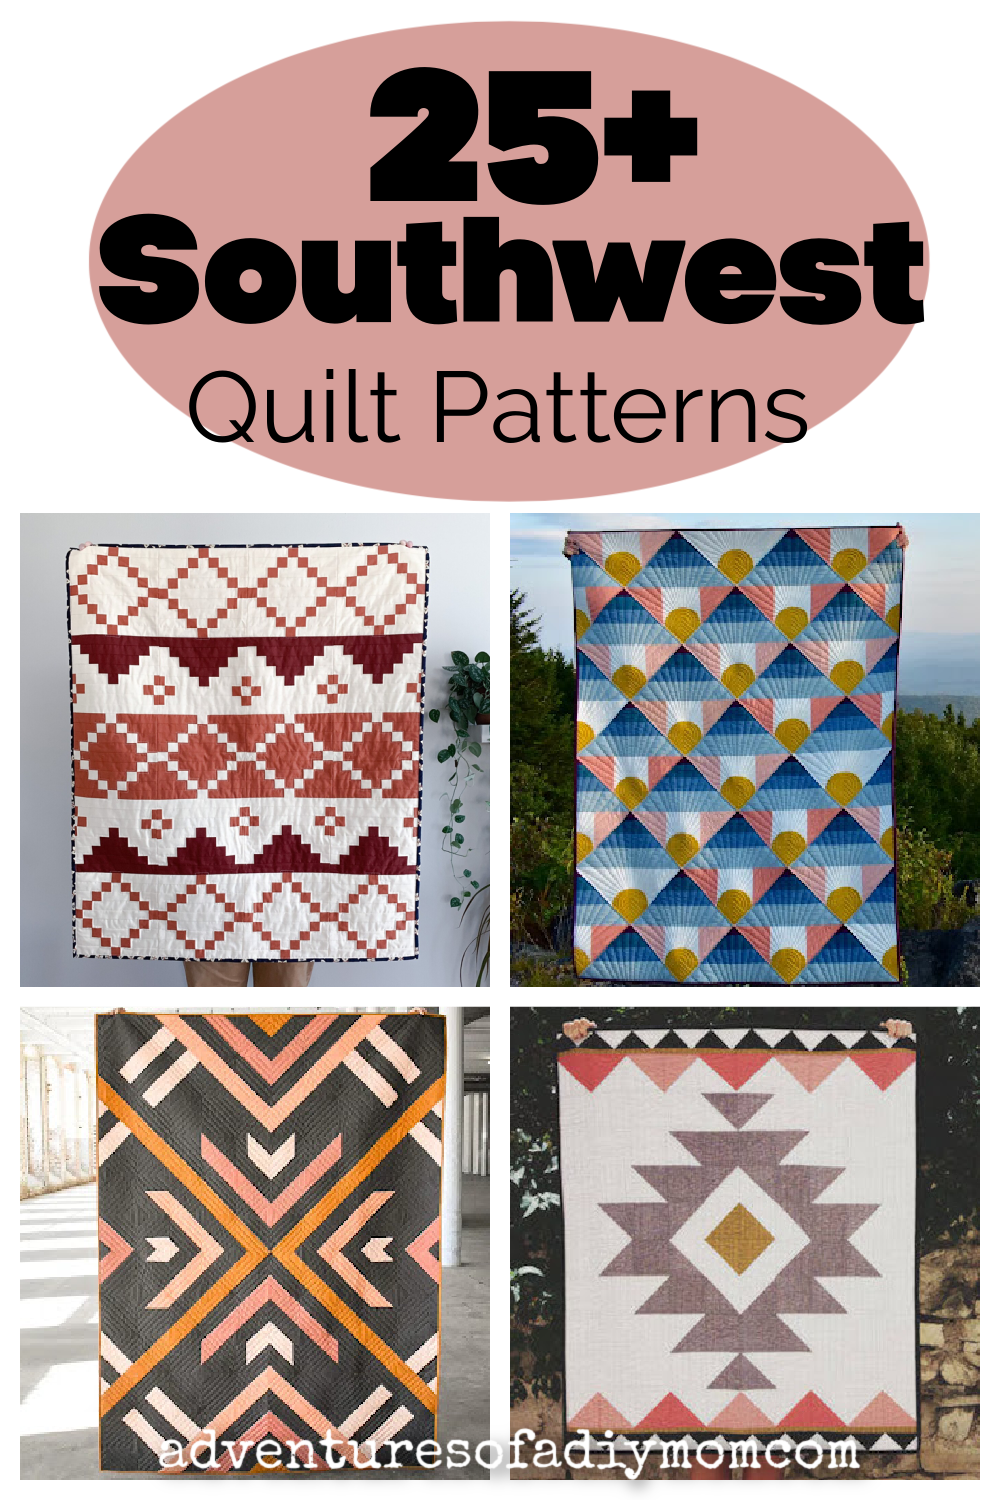 25 Southwest Quilt Patterns Adventures Of A DIY Mom